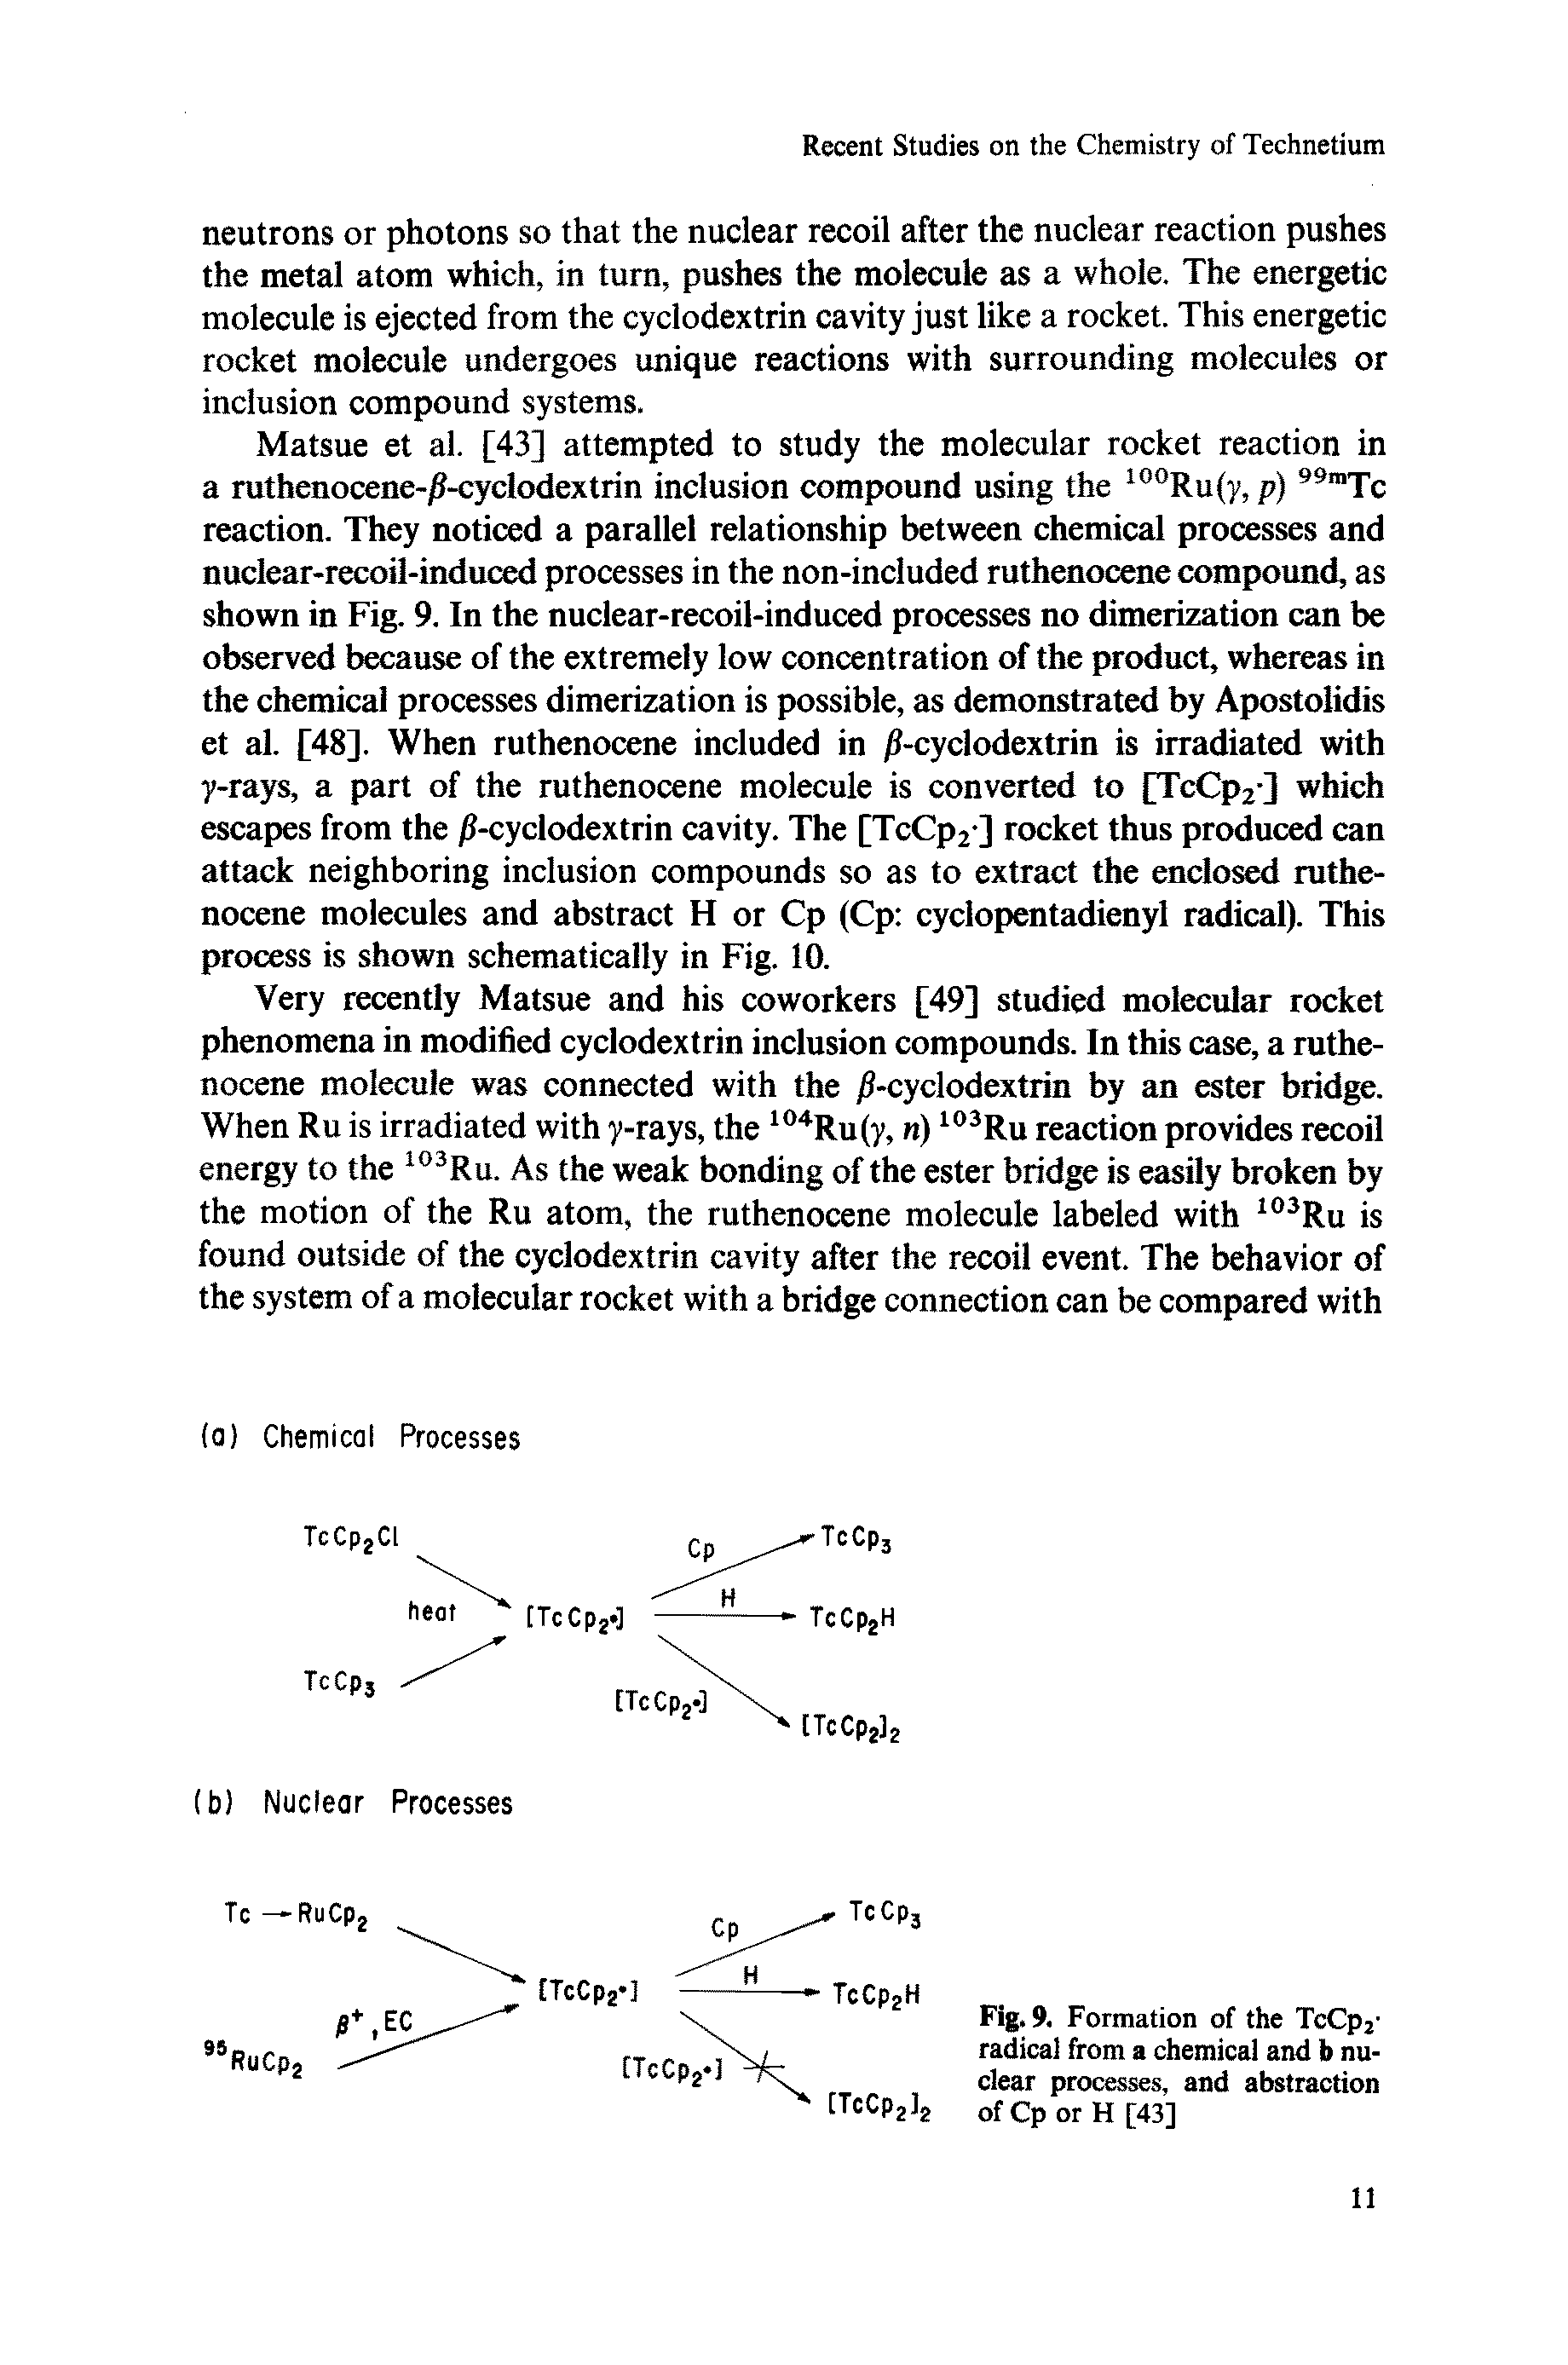 Fig. 9. Formation of the TcCp2-radical from a chemical and b nuclear processes, and abstraction...